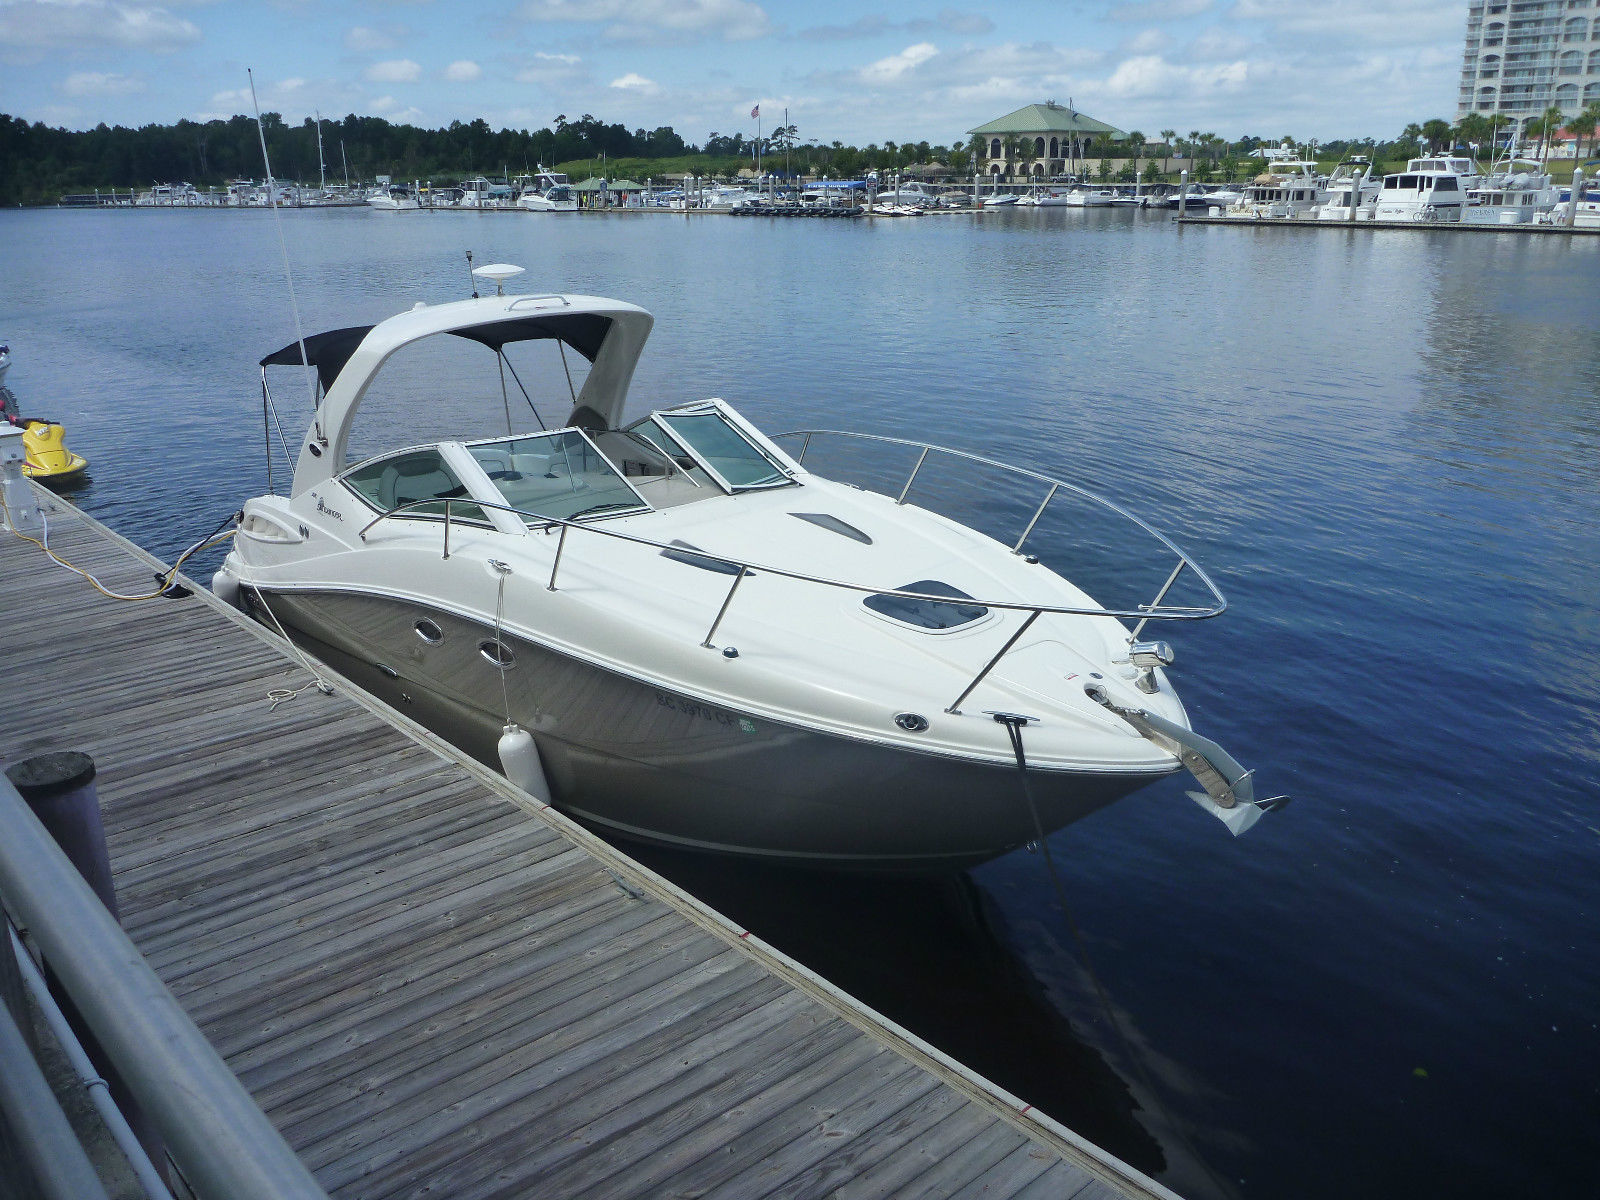 Sea Ray 290 Sundancer 2006 for sale for $85,000 - Boats ...